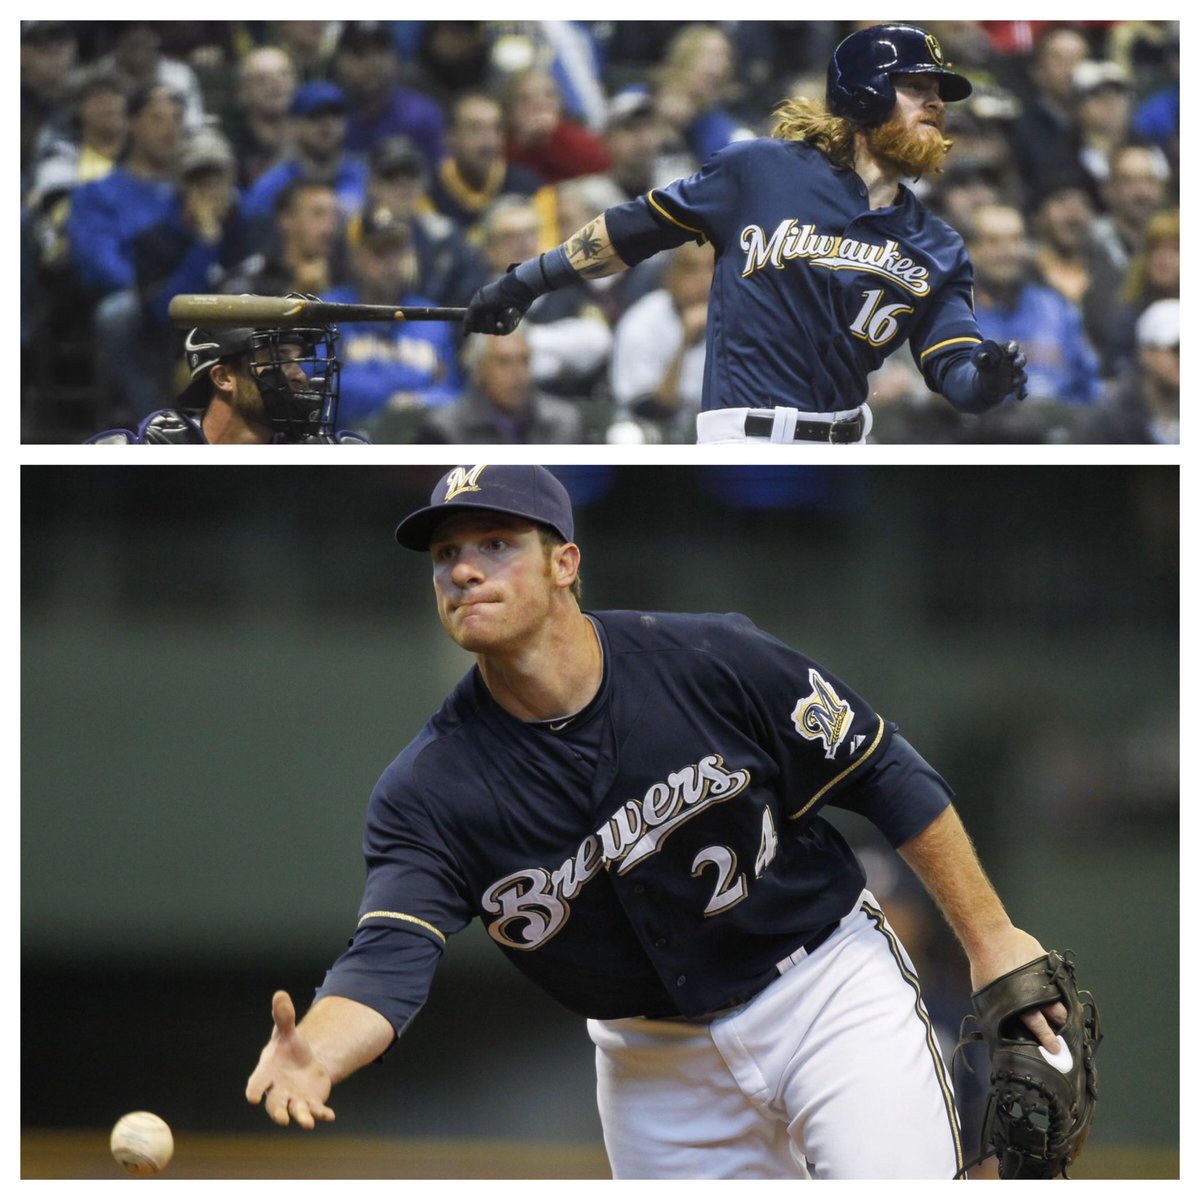 Today’s nugget from the 2020  @Brewers media guide:Ben Gamel (2019) joined his older brother Mat (2008-12) to become the second brother duo in franchise history. Steve (1986-88) and Mark (1993-96) Kiefer are the others. #ThisIsMyCrew